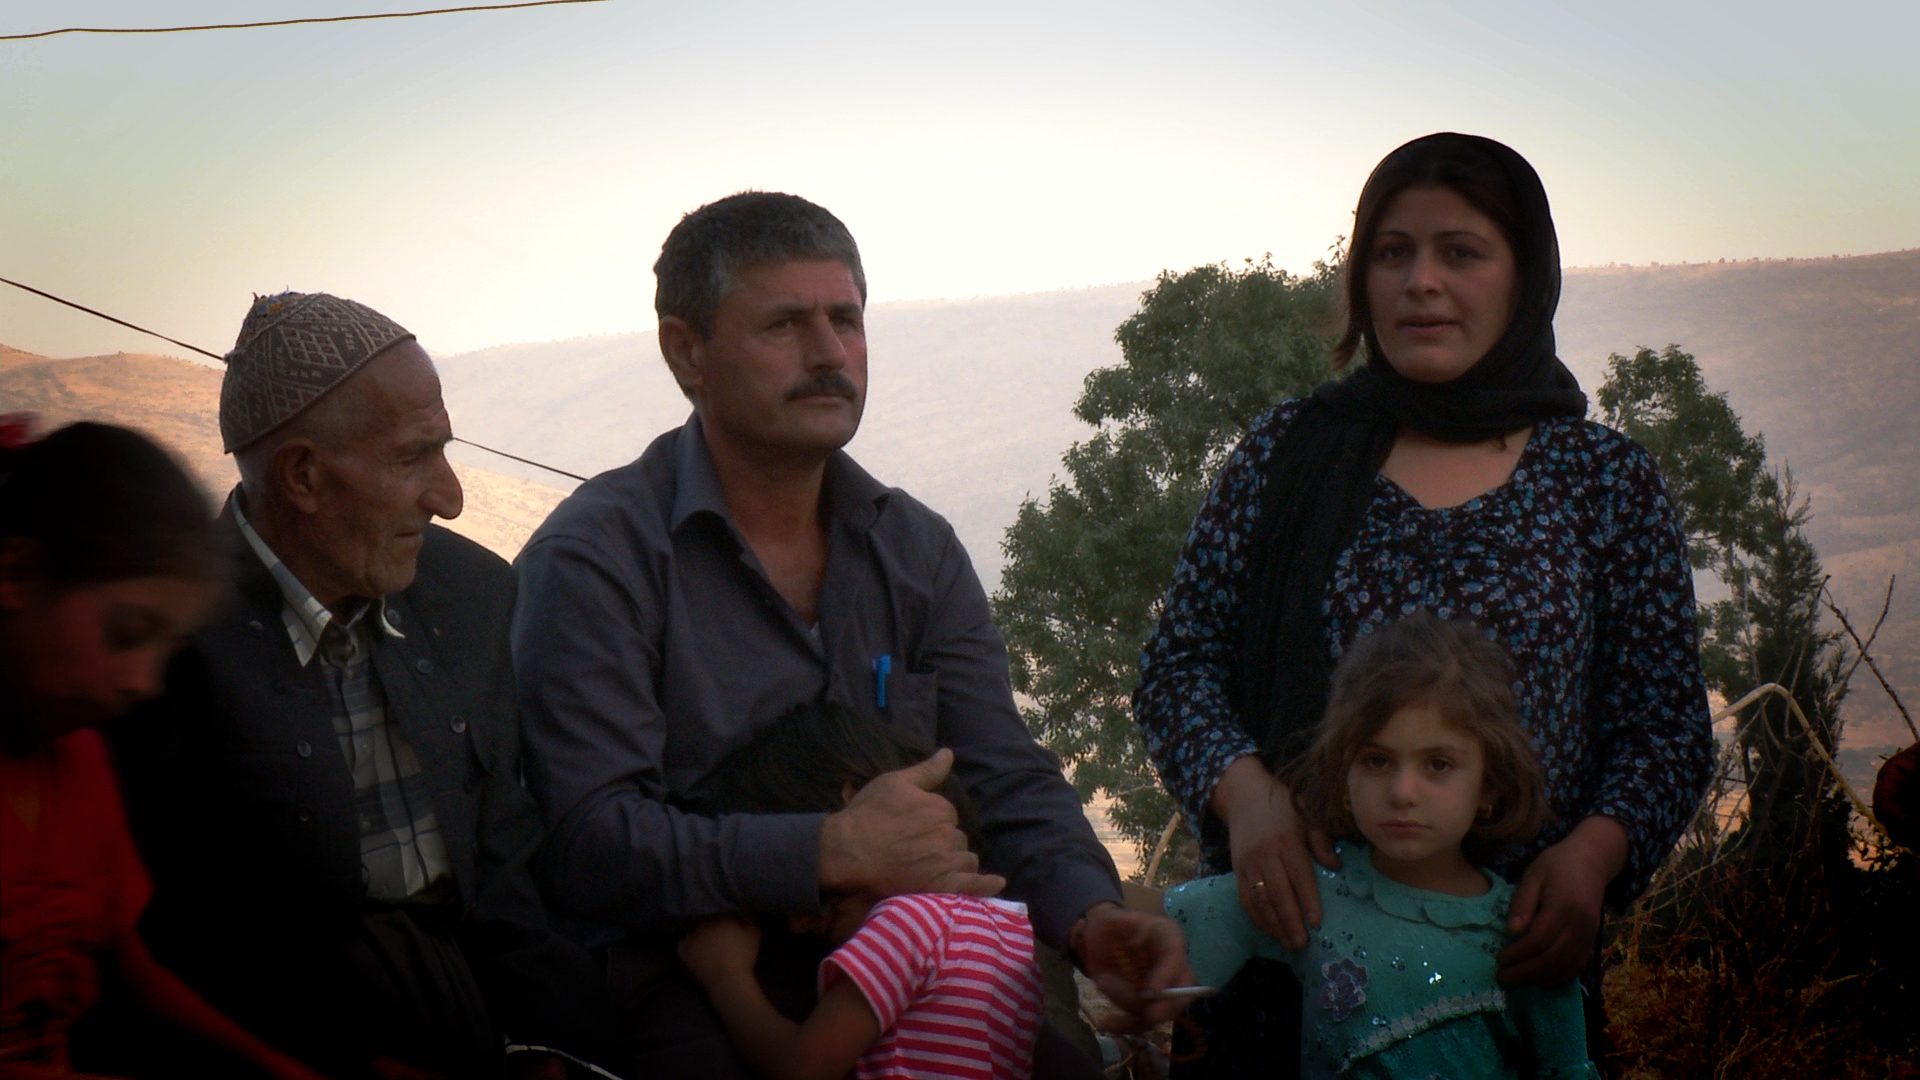 When Sheikh Wasan village was attacked by the Iraqi army, NAJIBA KHADIR AHMED escaped to the mountains with her children. Blinded by poison gas, she was led to safety by her sister-in-law. Her peshmerga husband, MUSTAFA RASUL HAMA AMIN, returned to find the village littered with the carcasses of dogs and cats.